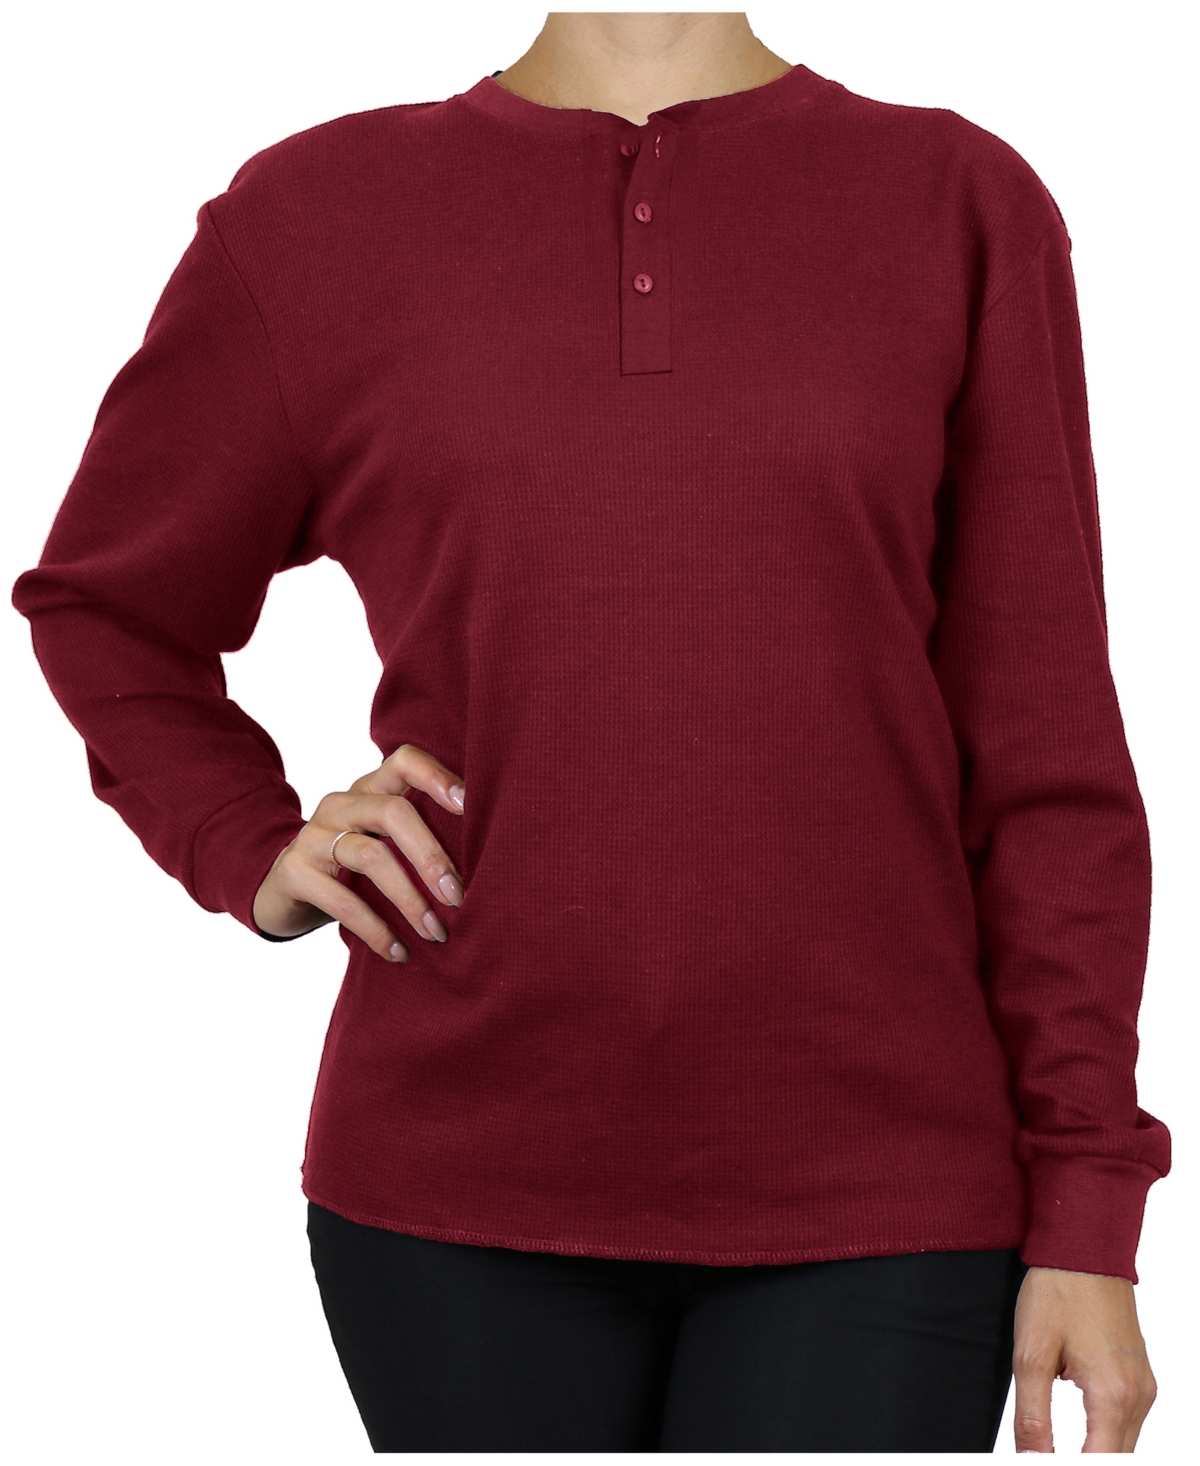 Galaxy By Harvic Women's Oversize Loose Fitting Waffle-knit Henley Thermal Sweater In Burgundy